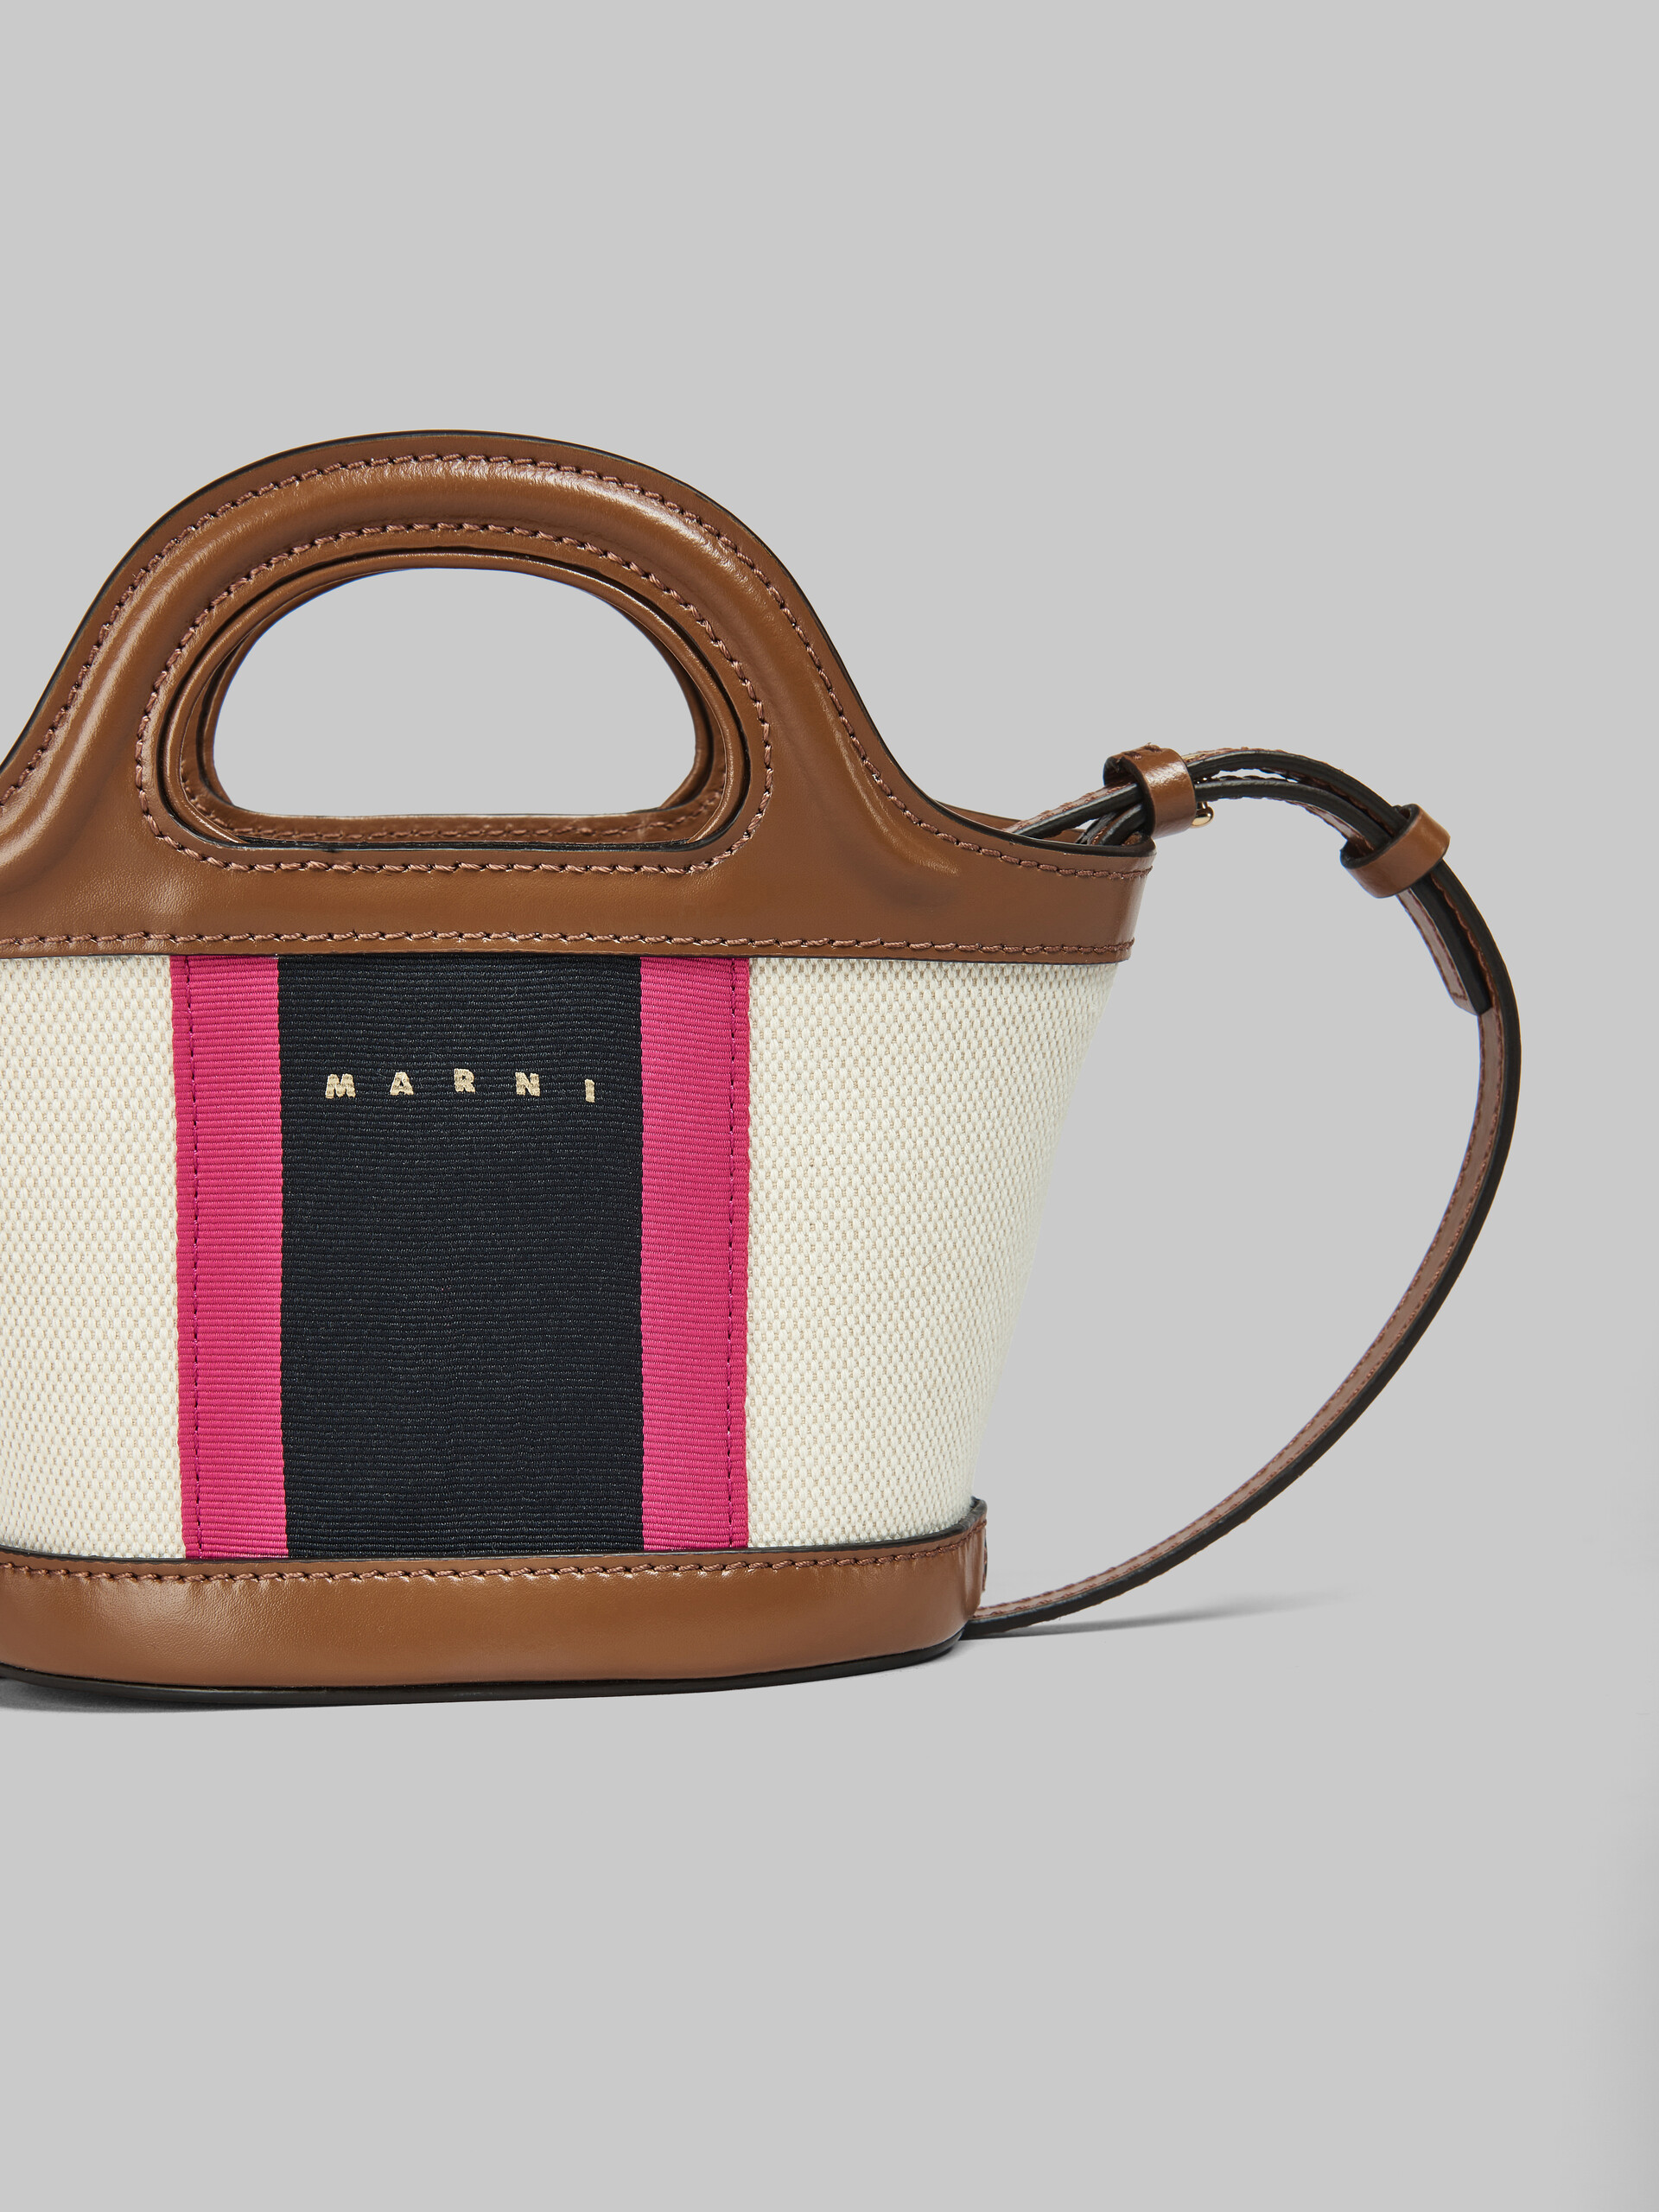 Tropicalia Micro Bag in Brown leather and striped canvas - Handbag - Image 5